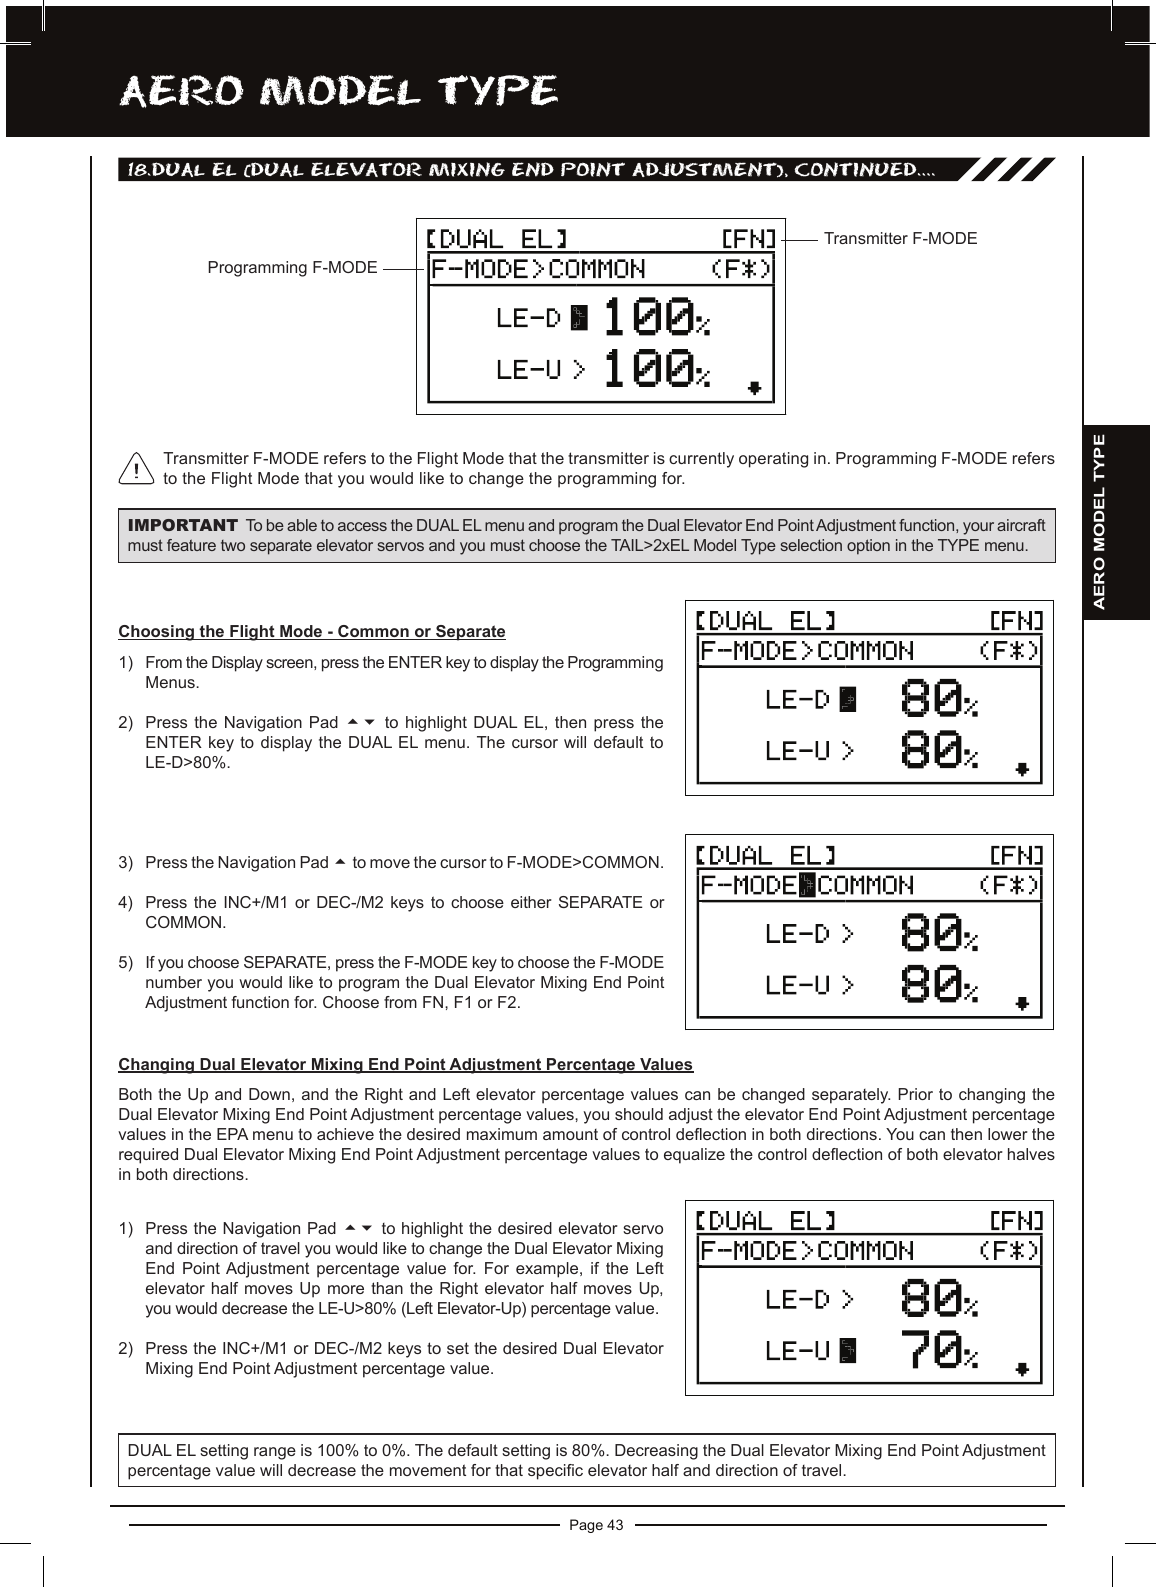 Page 43aERO MODEL TyPEProgramming F-MODETransmitter F-MODETransmitter F-MODE refers to the Flight Mode that the transmitter is currently operating in. Programming F-MODE refers to the Flight Mode that you would like to change the programming for.18.DUaL EL (DUaL ELEvaTOR MiXing EnD POinT aDjUSTMEnT), cOnTinUED....IMPORTANT To be able to access the DUAL EL menu and program the Dual Elevator End PointAdjustment function, your aircraft must feature two separate elevator servos and you must choose the TAIL&gt;2xEL Model Type selection option in the TYPE menu.Choosing the Flight Mode - Common or Separate1) From the Display screen, press the ENTER key to display the Programming Menus.2) Press the  Navigation  Pad  56 to  highlight  DUAL EL,  then  press  the ENTER key  to  display the DUAL EL menu. The cursor  will  default to LE-D&gt;80%.3) Press the Navigation Pad 5to move the cursor to F-MODE&gt;COMMON.4) Press the INC+/M1 or DEC-/M2 keys to choose either SEPARATE or COMMON.5) If you choose SEPARATE, press the F-MODE key to choose the F-MODE number you would like to program the Dual Elevator Mixing End Point Adjustment function for. Choose from FN, F1 or F2.Changing Dual Elevator Mixing End Point Adjustment Percentage ValuesBoth the Up and Down, and the Right and Left elevator percentage values can be changed separately. Prior to changing the Dual Elevator Mixing End Point Adjustment percentage values, you should adjust the elevator End Point Adjustment percentage values in the EPA menu to achieve the desired maximum amount of control deection in both directions. You can then lower the required Dual Elevator Mixing End Point Adjustment percentage values to equalize the control deection of both elevator halves in both directions.1) Press the Navigation Pad 56 to highlight the desired elevator servo and direction of travel you would like to change the Dual Elevator Mixing End  Point Adjustment  percentage  value  for.  For  example,  if  the  Left elevator half  moves Up more than  the Right elevator half  moves Up, you would decrease the LE-U&gt;80% (Left Elevator-Up) percentage value. 2) Press the INC+/M1 or DEC-/M2 keys to set the desired Dual Elevator Mixing End Point Adjustment percentage value.DUAL EL setting range is 100% to 0%. The default setting is 80%. Decreasing the Dual Elevator Mixing End Point Adjustment percentage value will decrease the movement for that specic elevator half and direction of travel.AERO MODEL TYPE